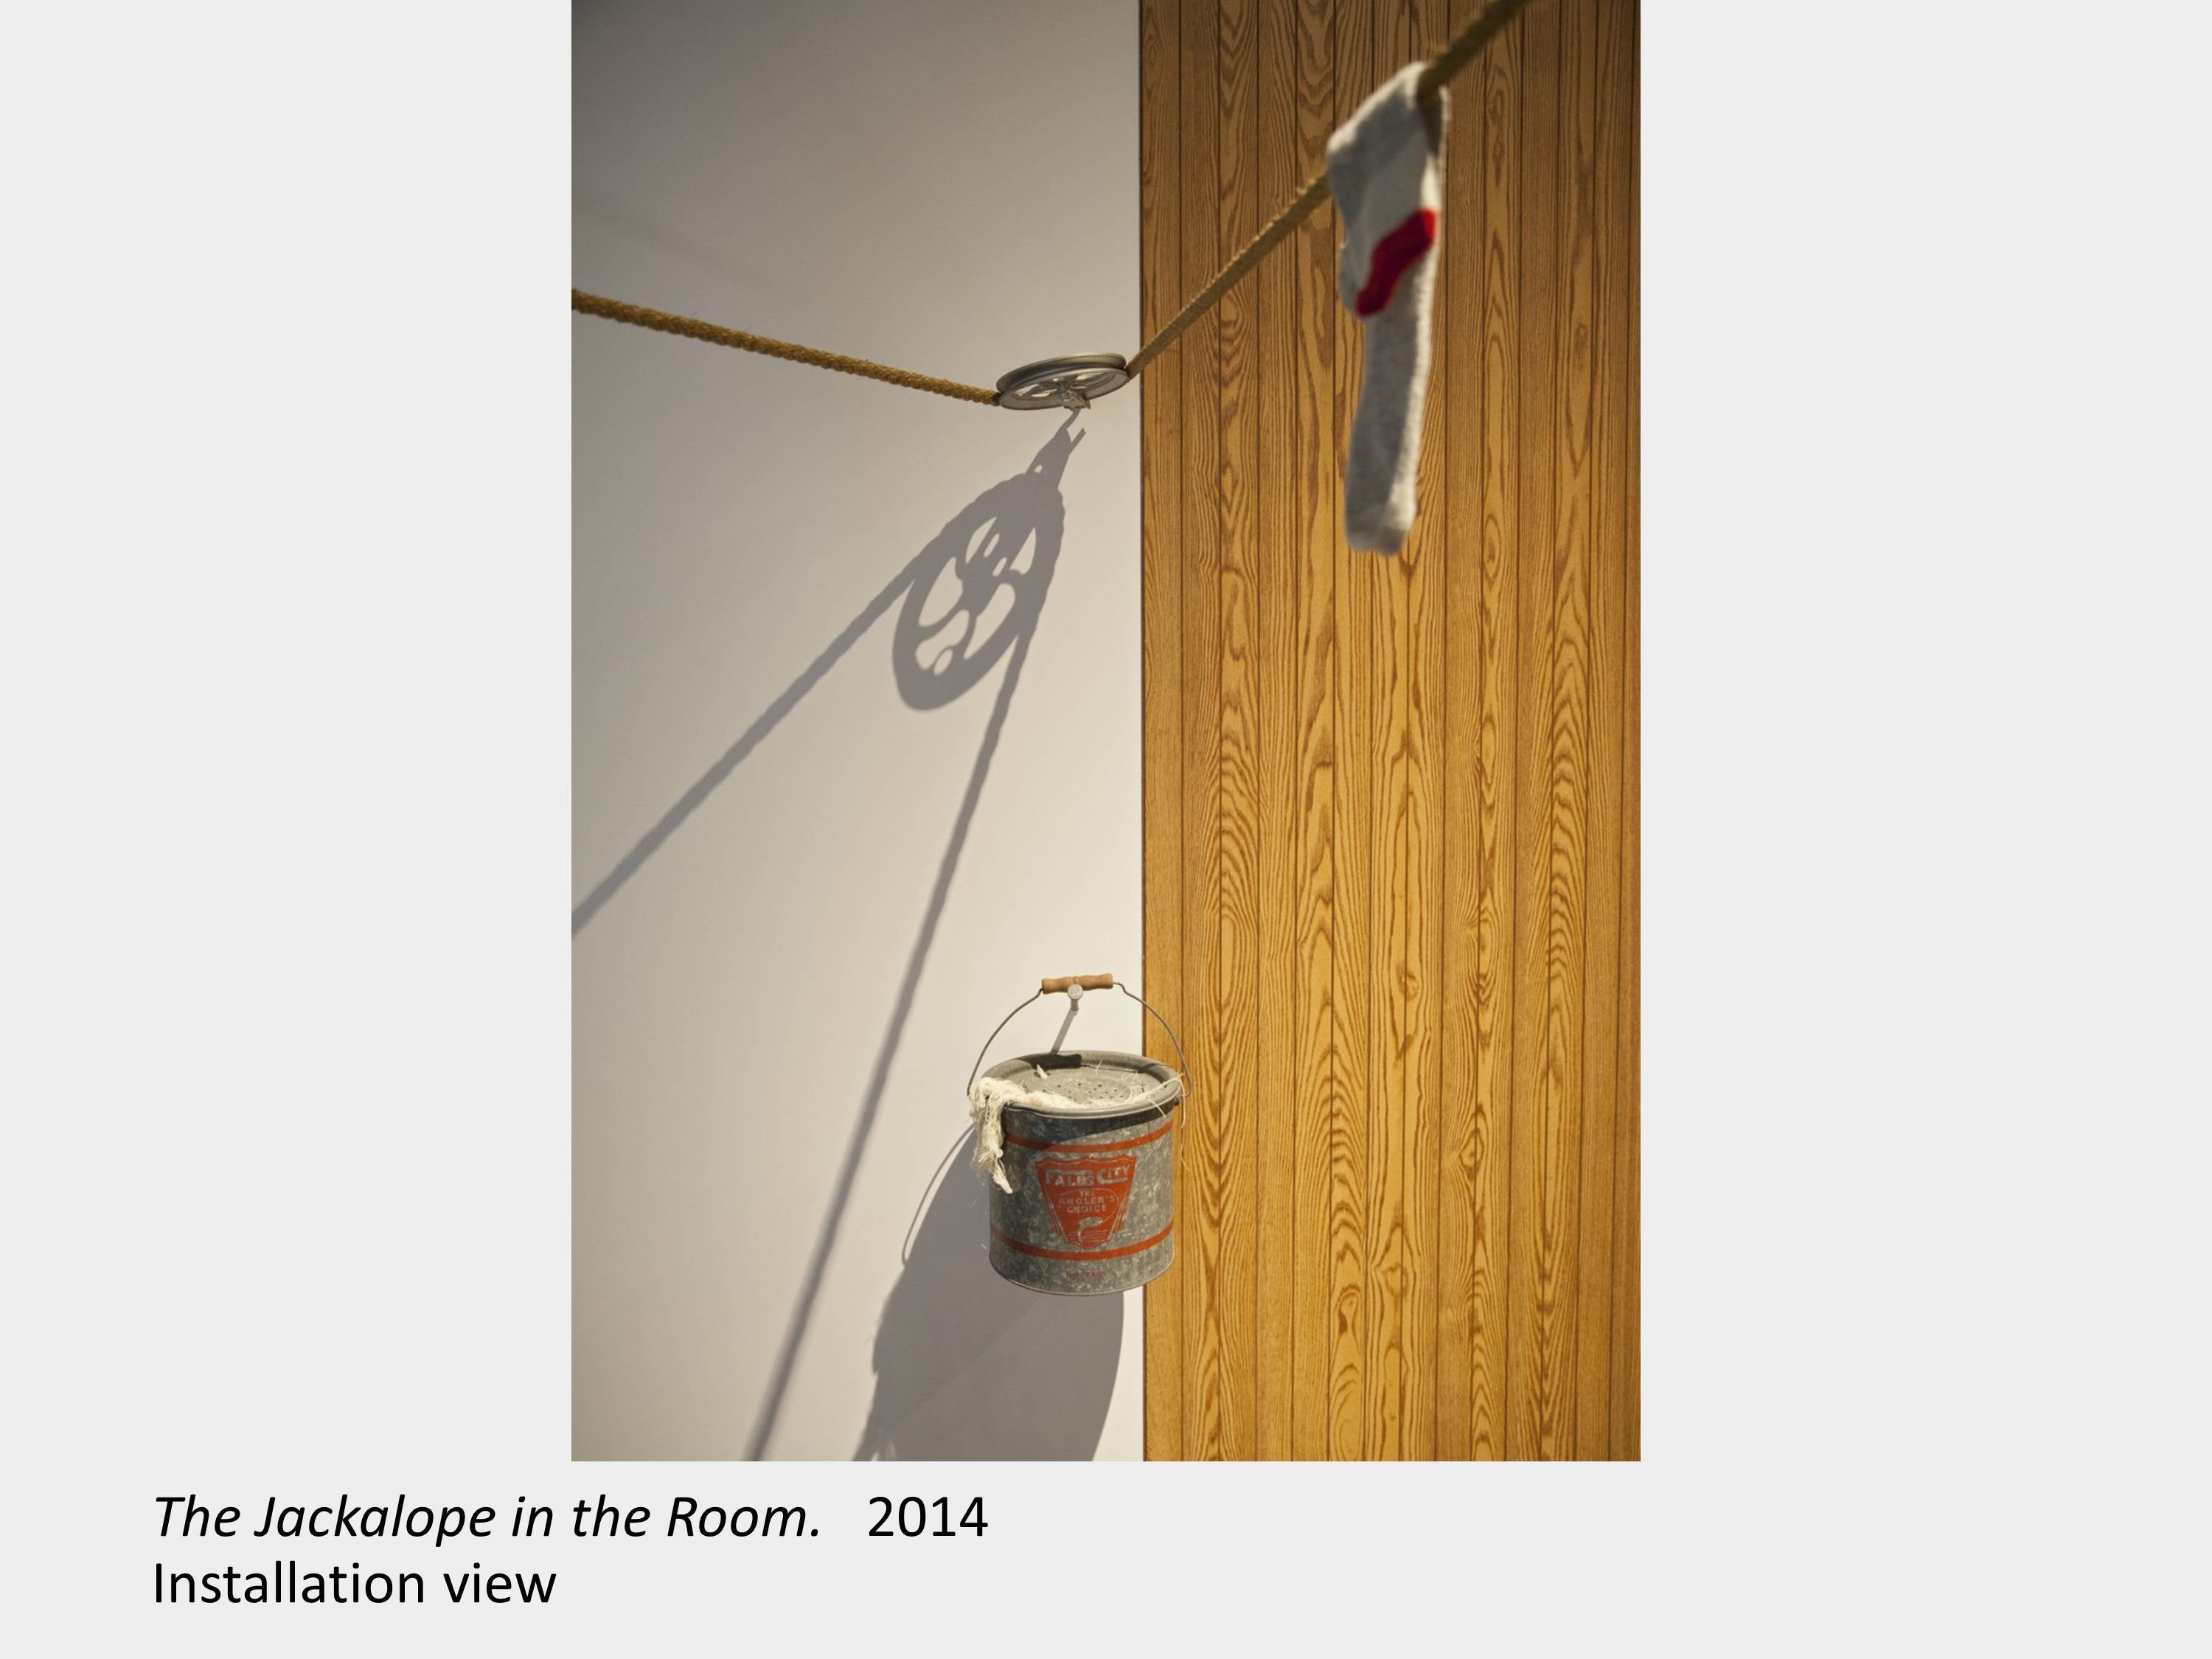 Artwork by Meghan Green. The Jackalope in the Room. 2014. Installation view.